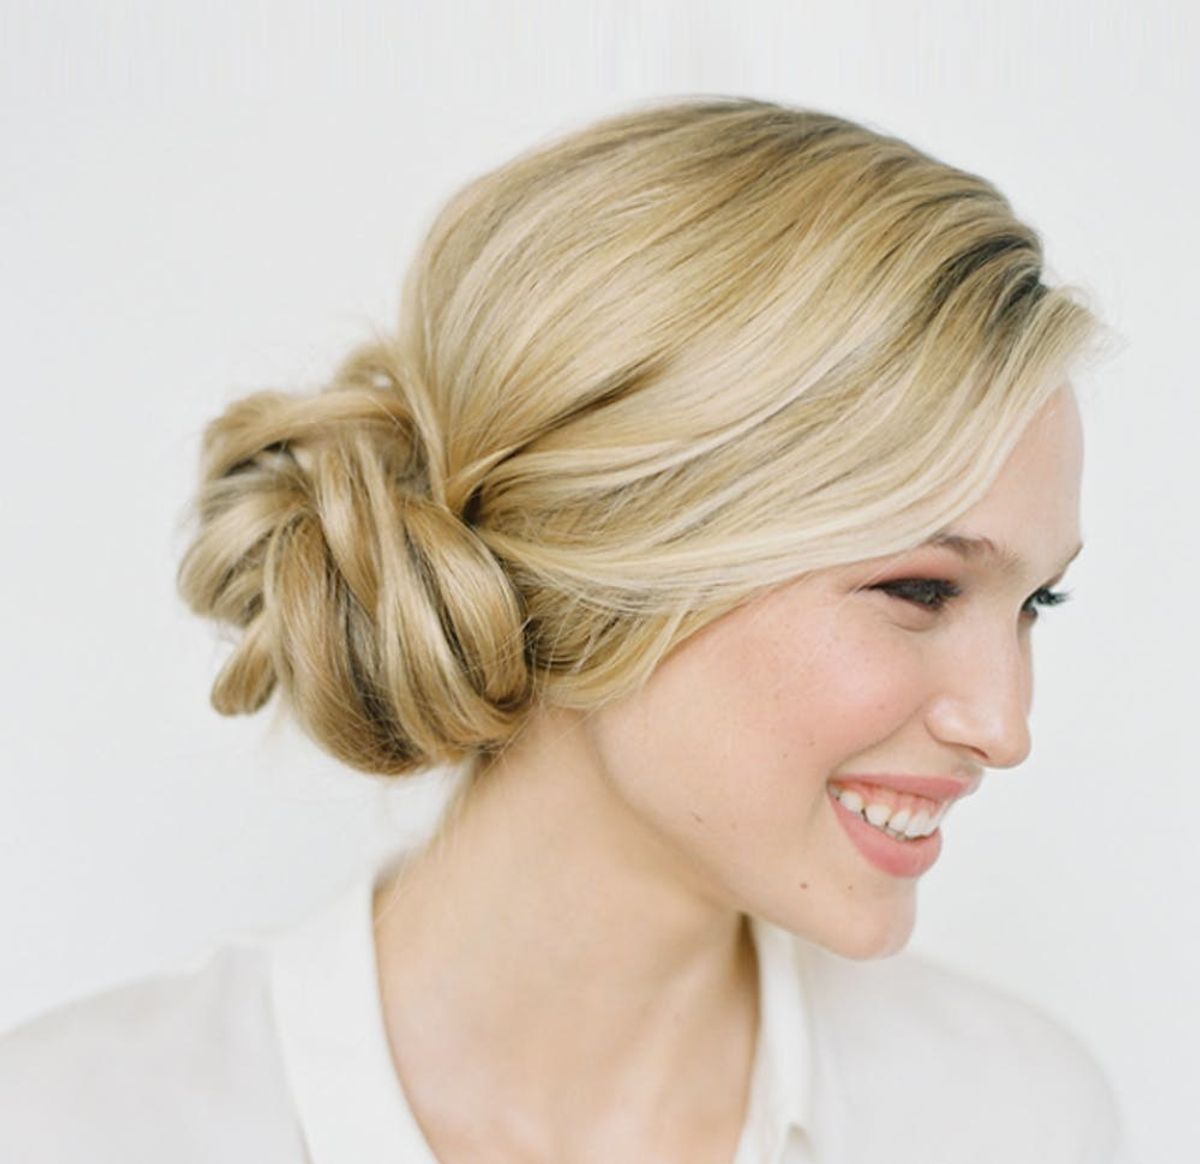 25 5-Minute Hairdos That Will Transform Your Morning Routine